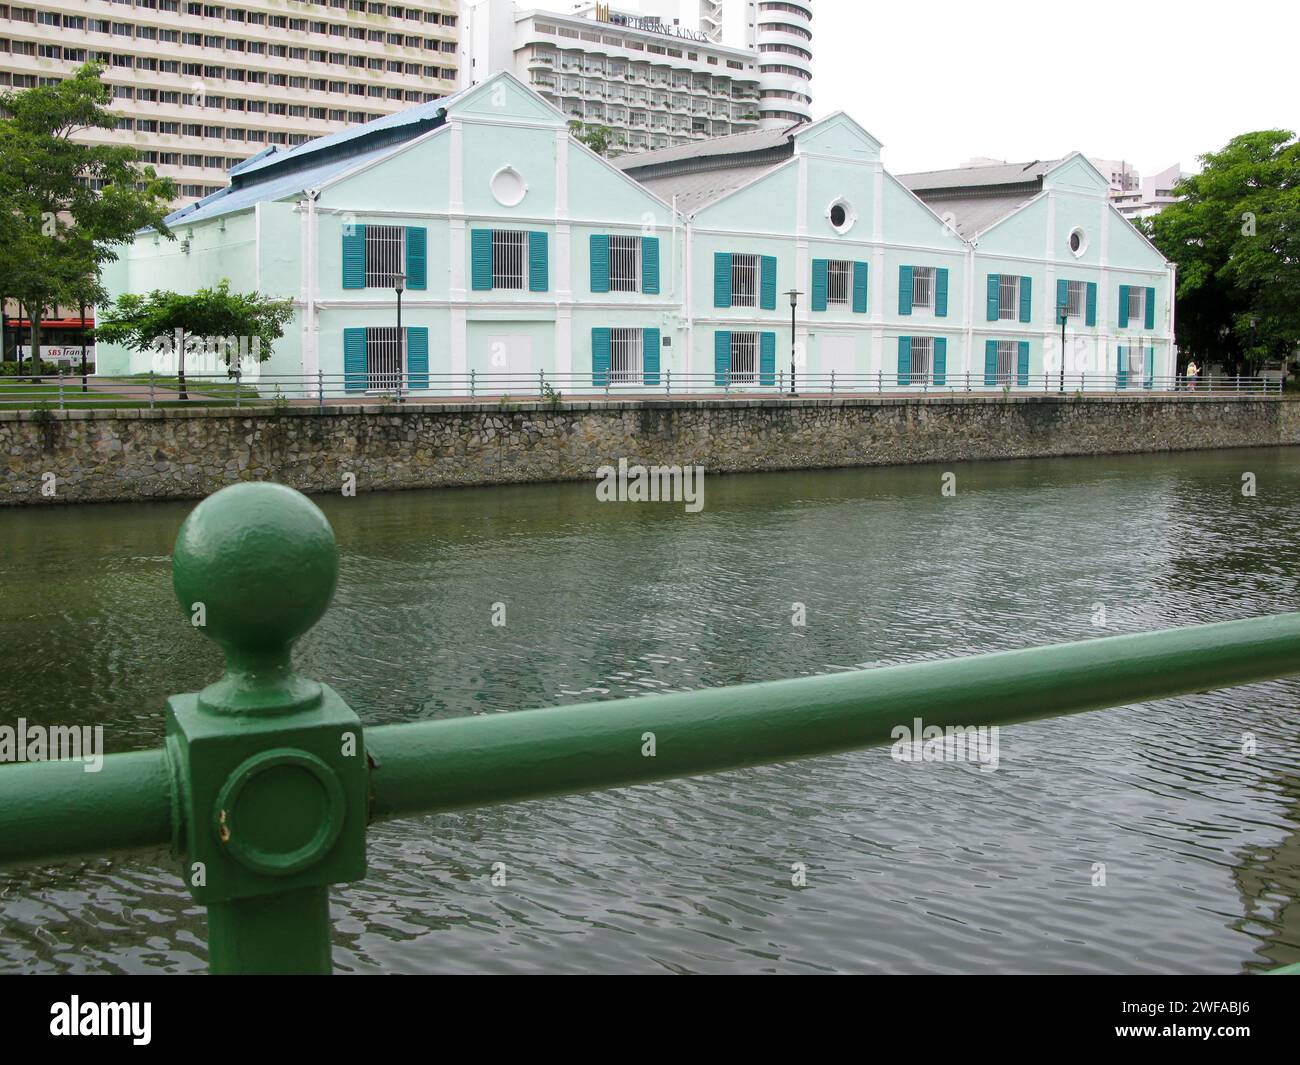 The Warehouse Hotel in Robertson Quay on the banks of Singapore River, formerly a 19th century godown or warehouse. Stock Photo